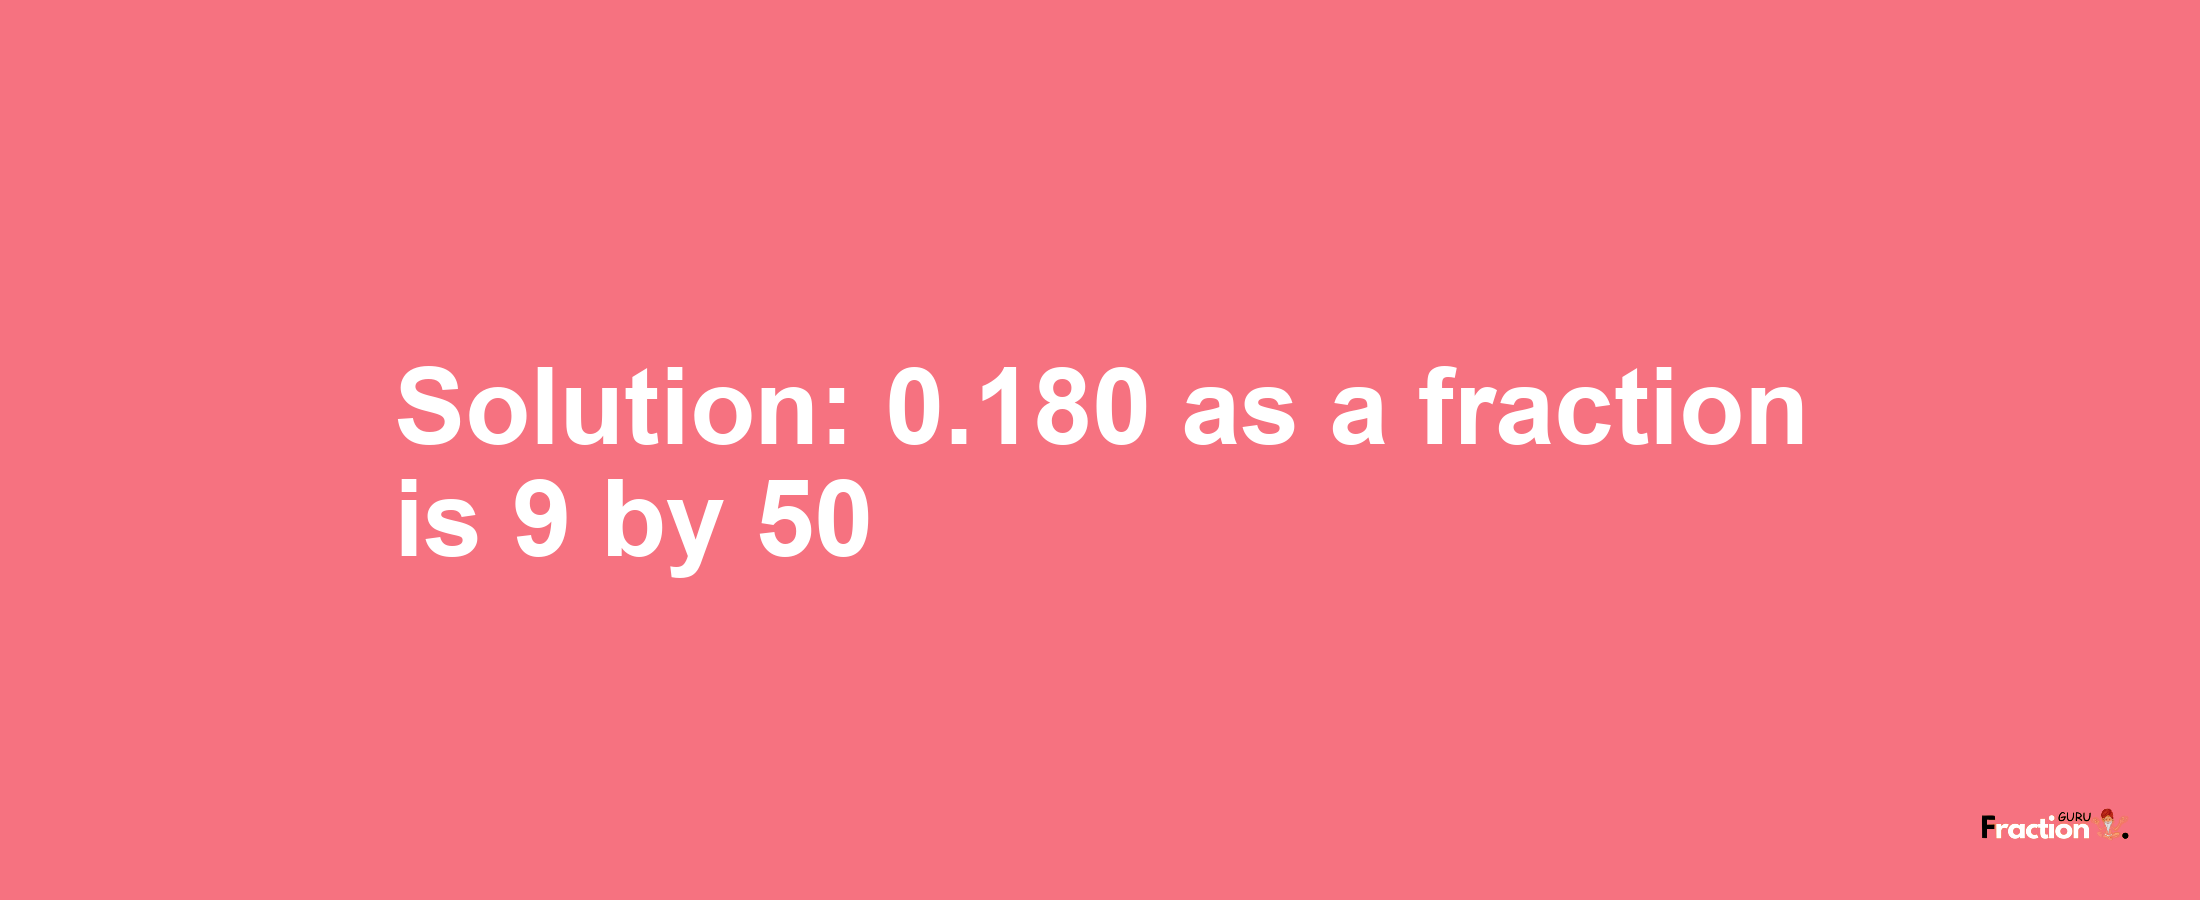 Solution:0.180 as a fraction is 9/50